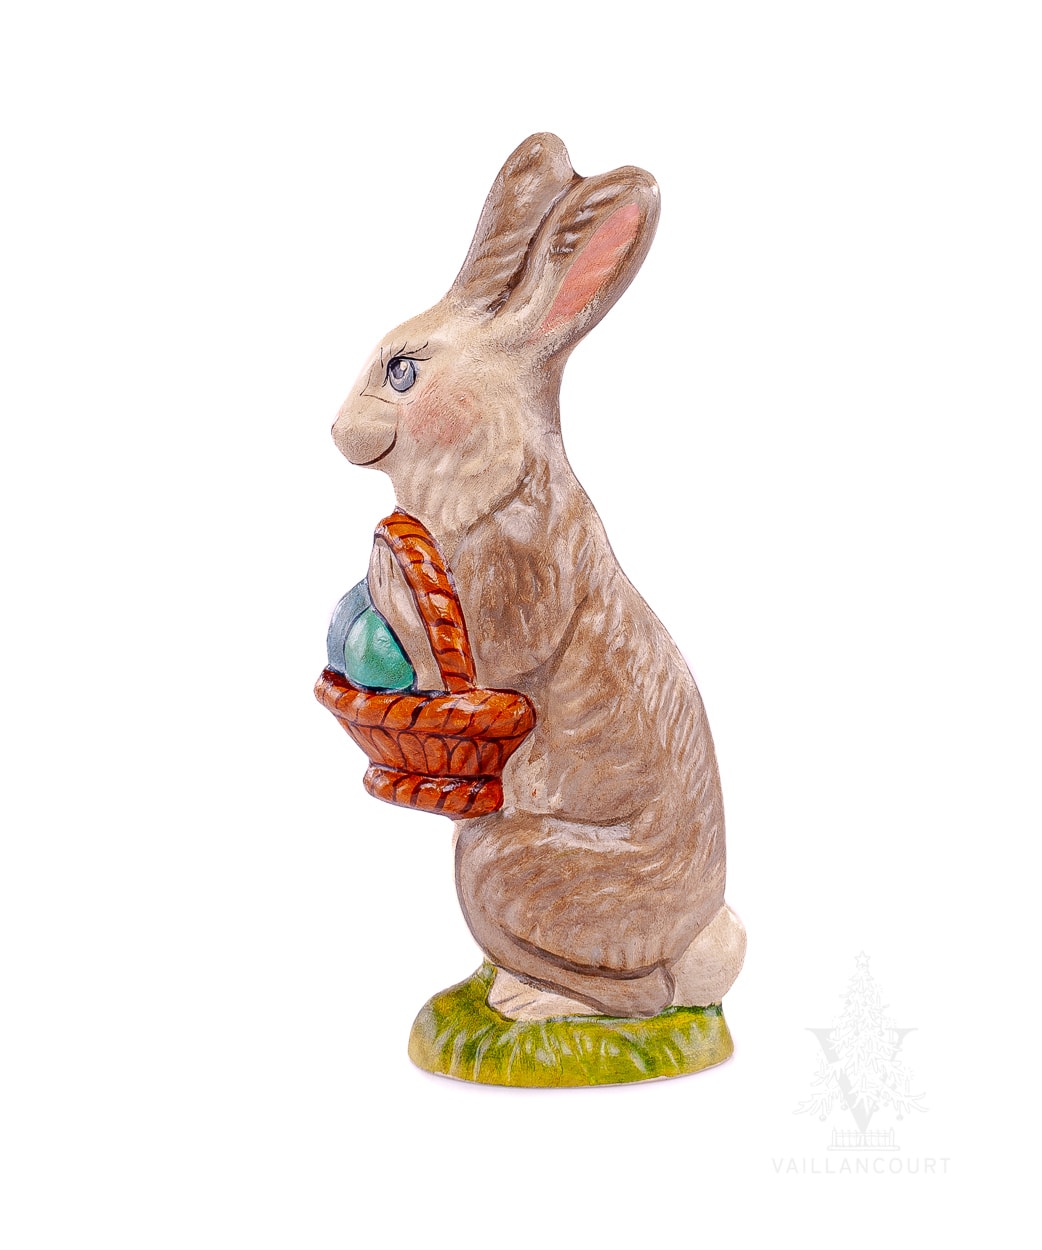 Rabbit with Egg Basket from Vaillancourt